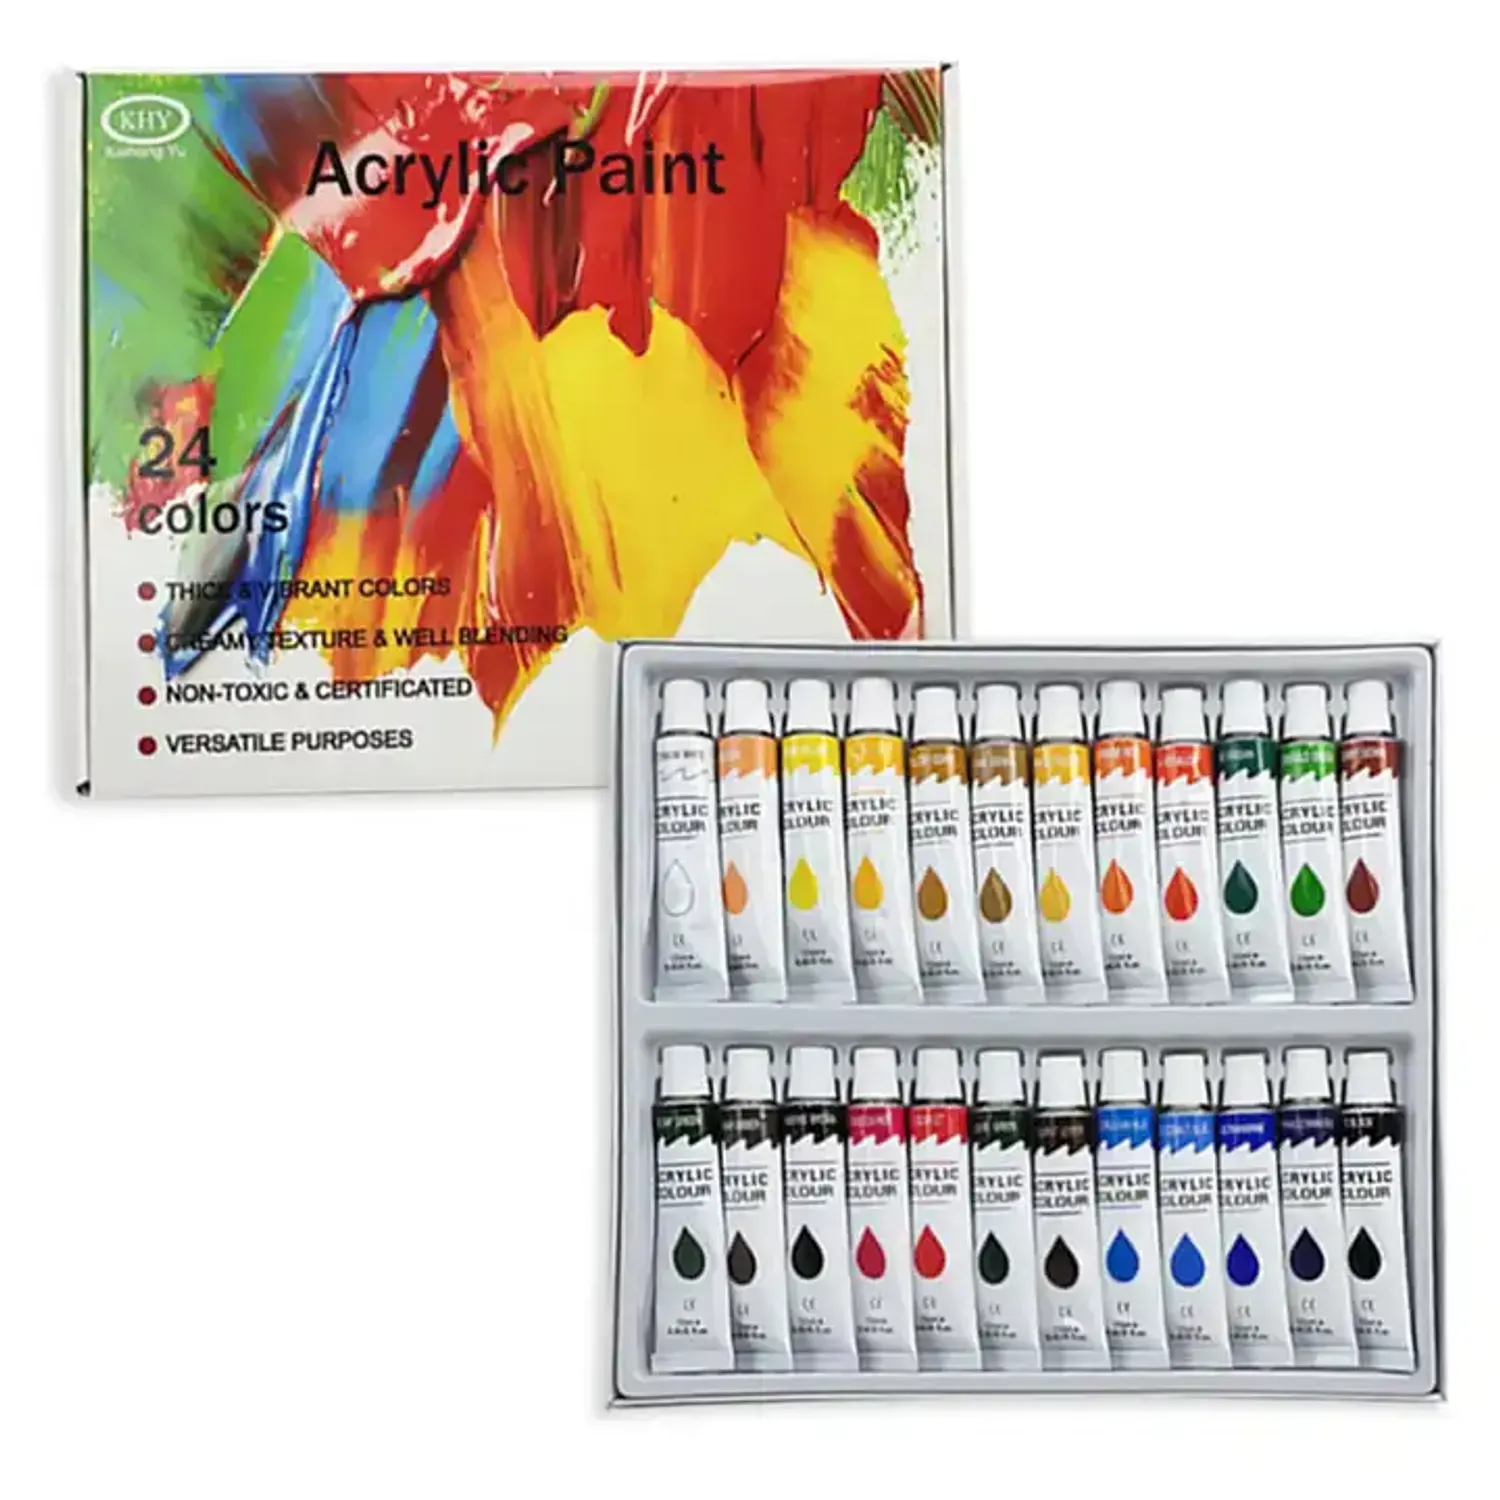 DIY Painting 24 Color Box With Brush Set Acrylic Paint Kit